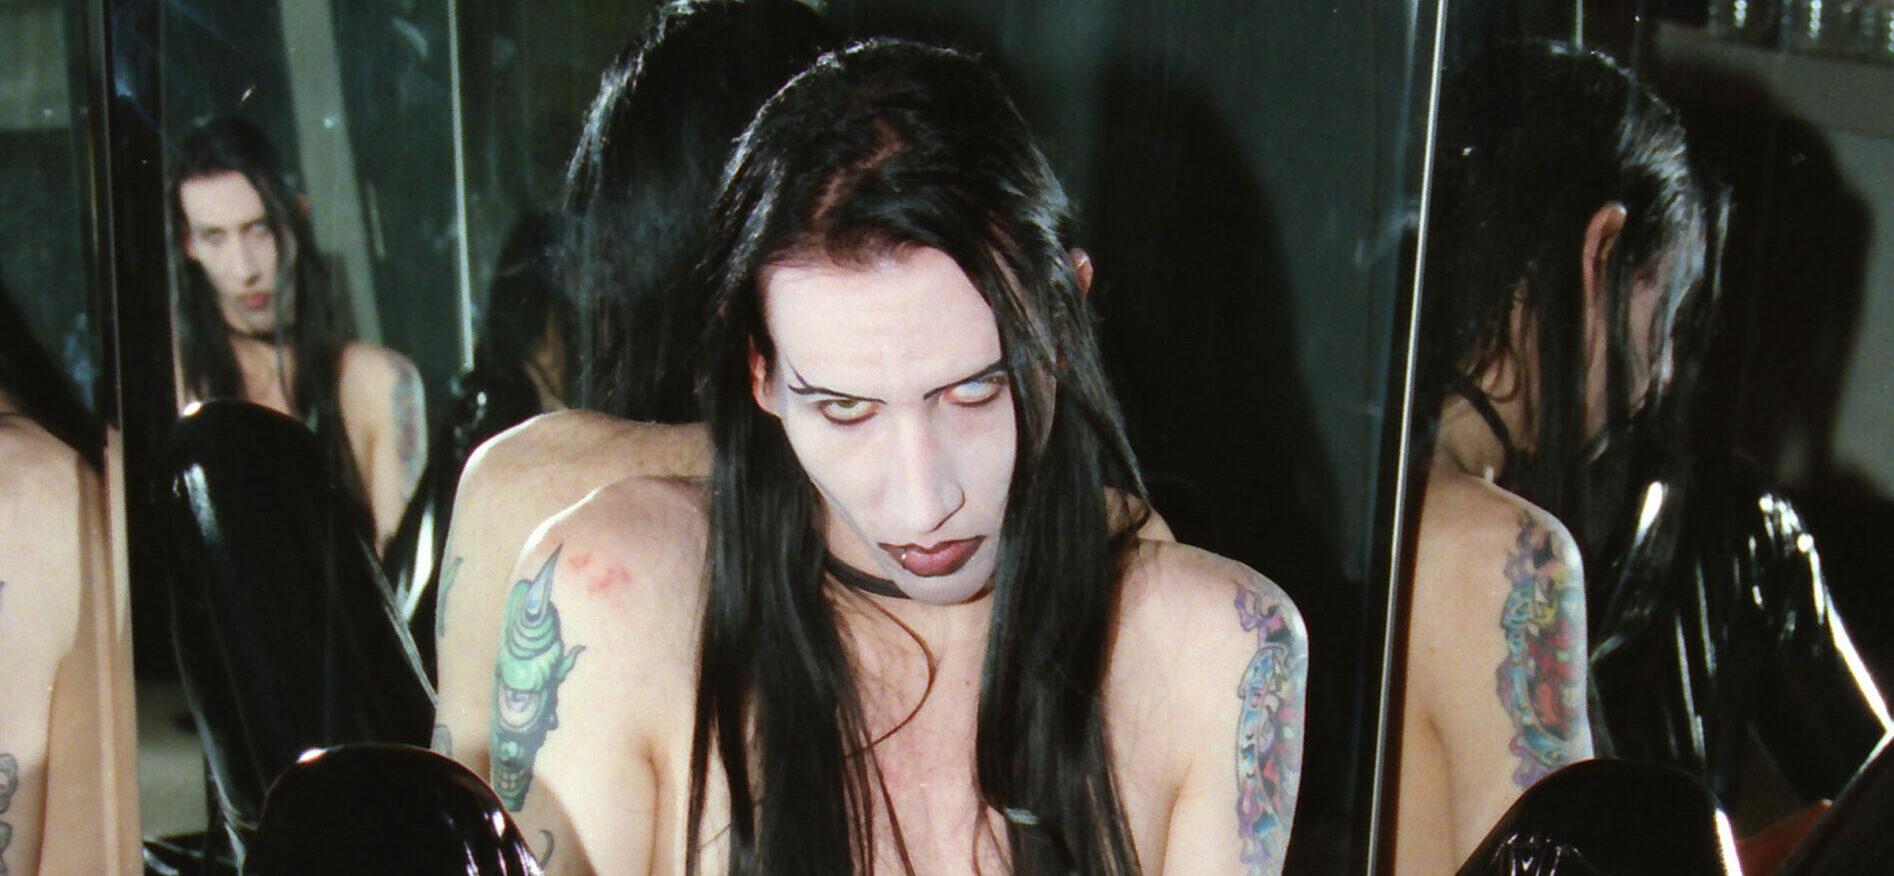 Archive images of Marilyn Manson who has been has been accused of abuse grooming and coercion by multiple women